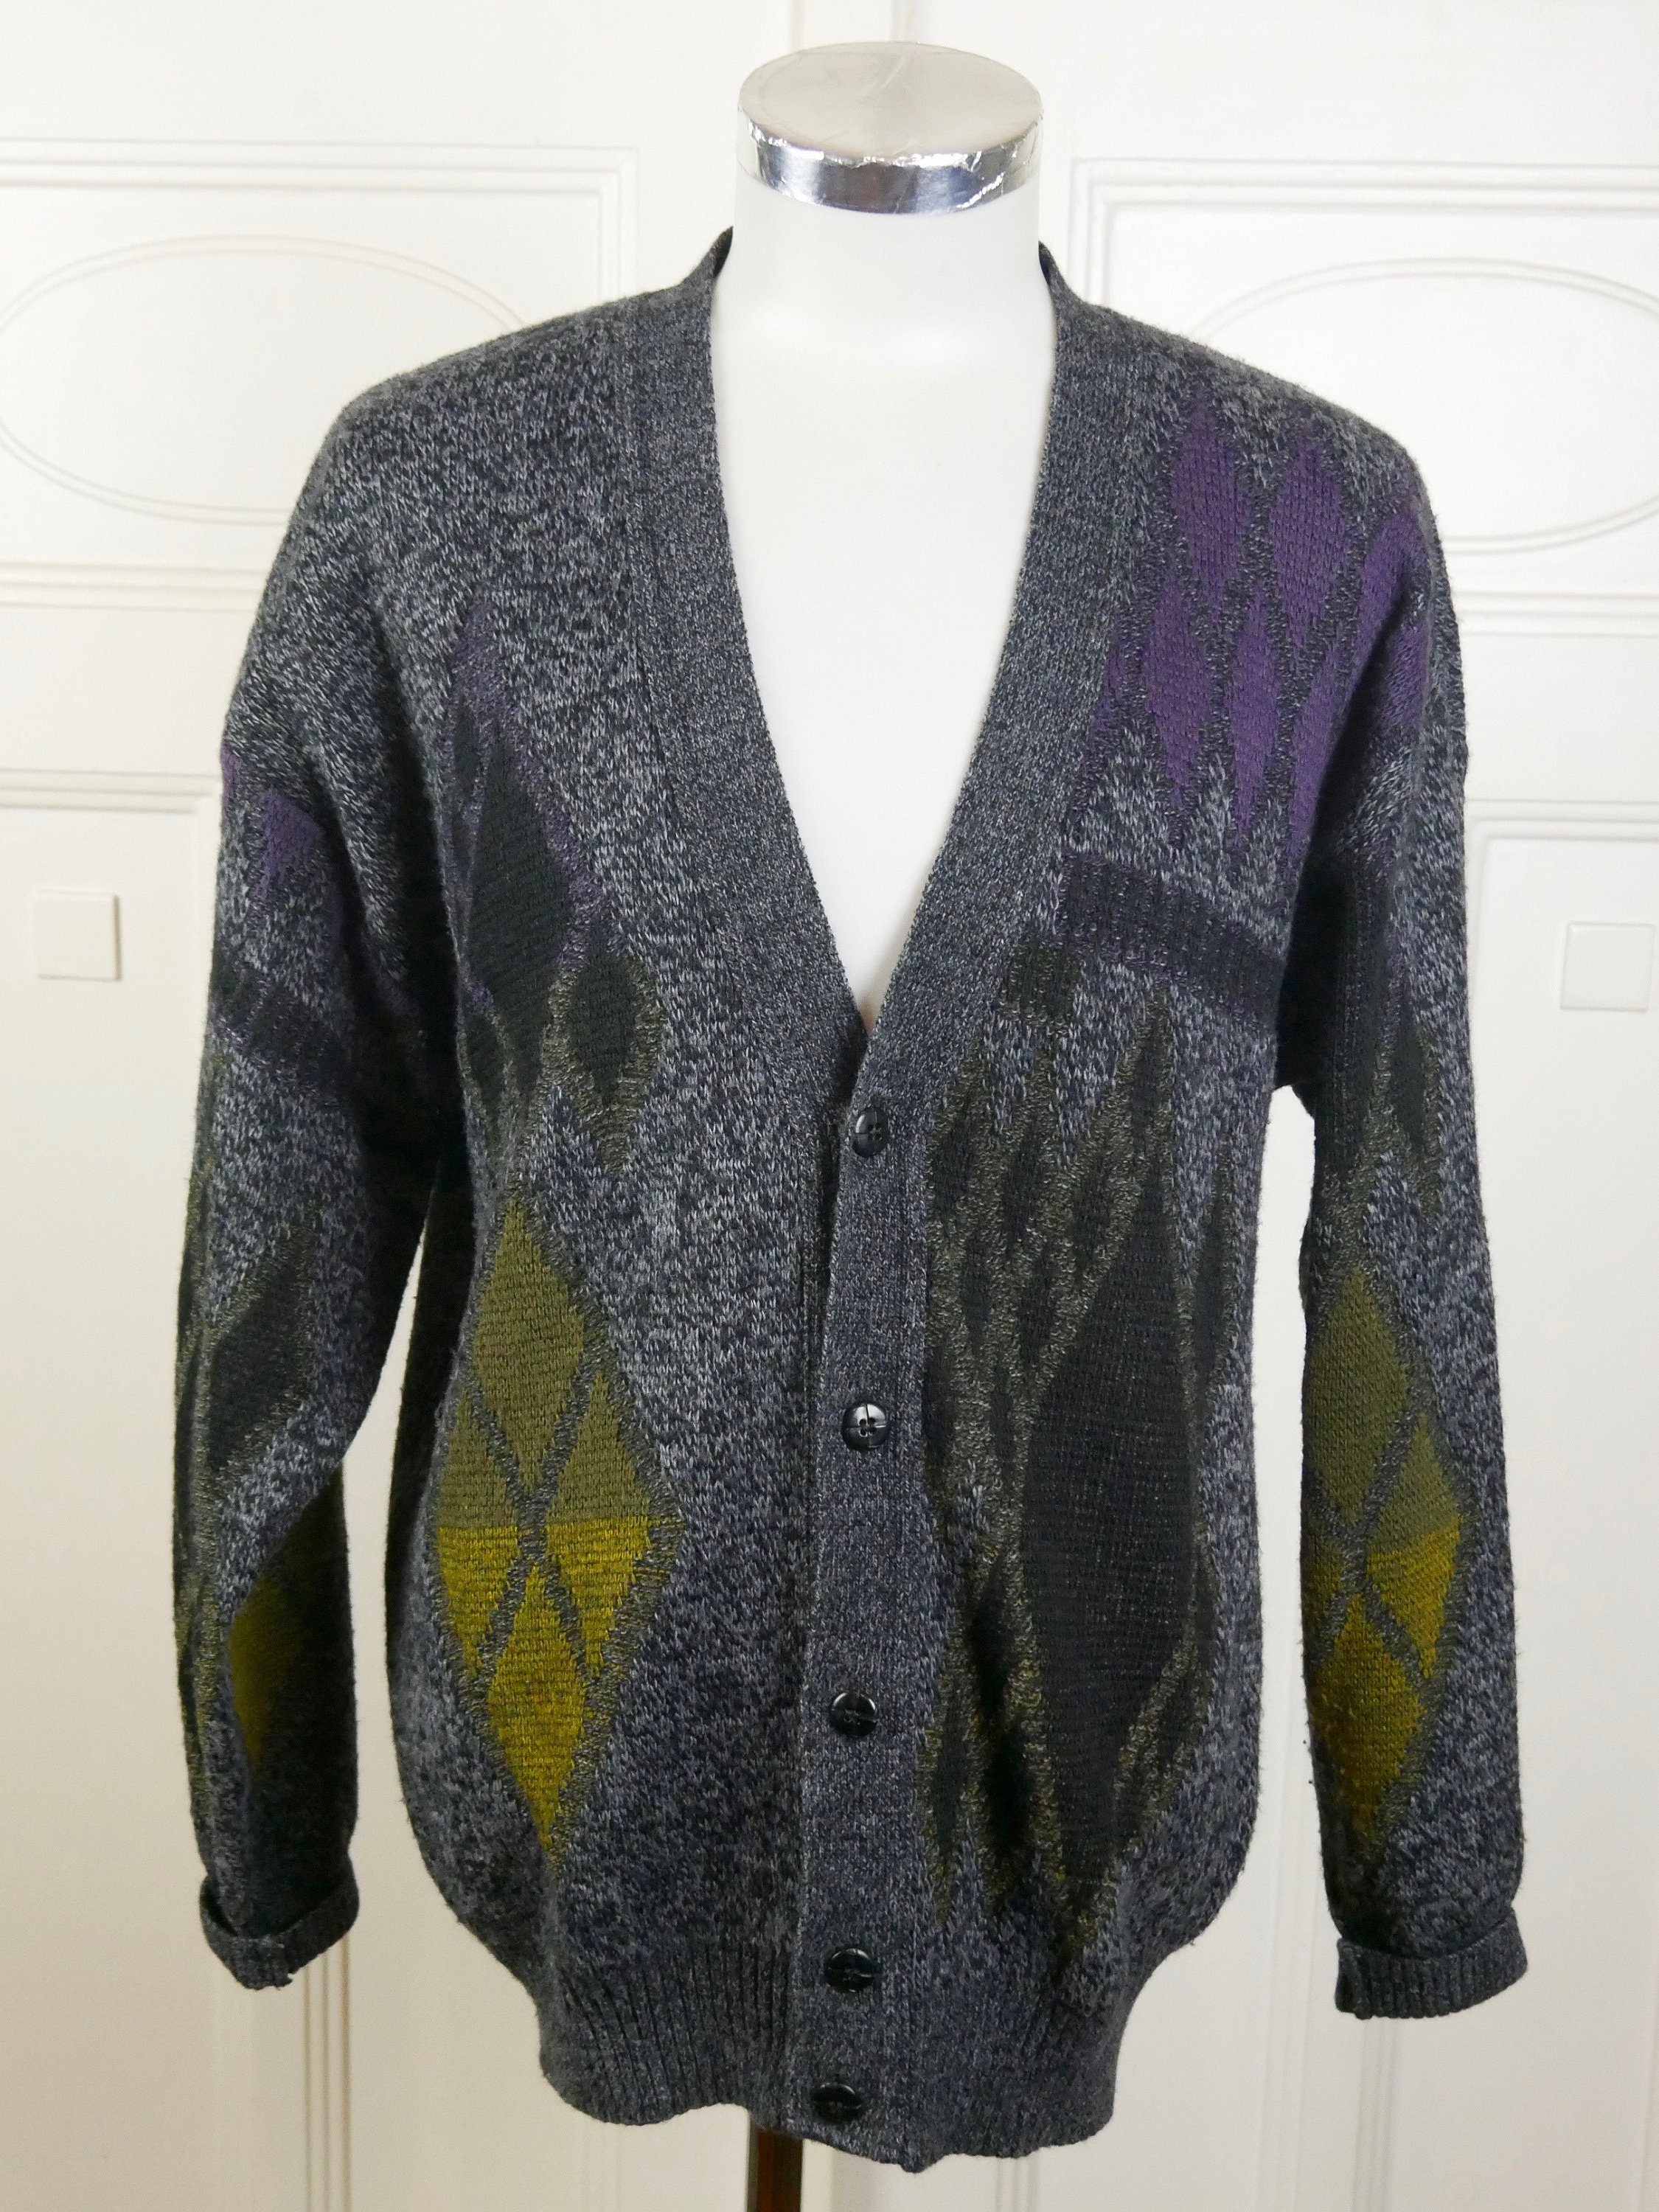 Vintage Cardigan 1980s Charcoal Gray Soft Wool Blend Knit - Etsy